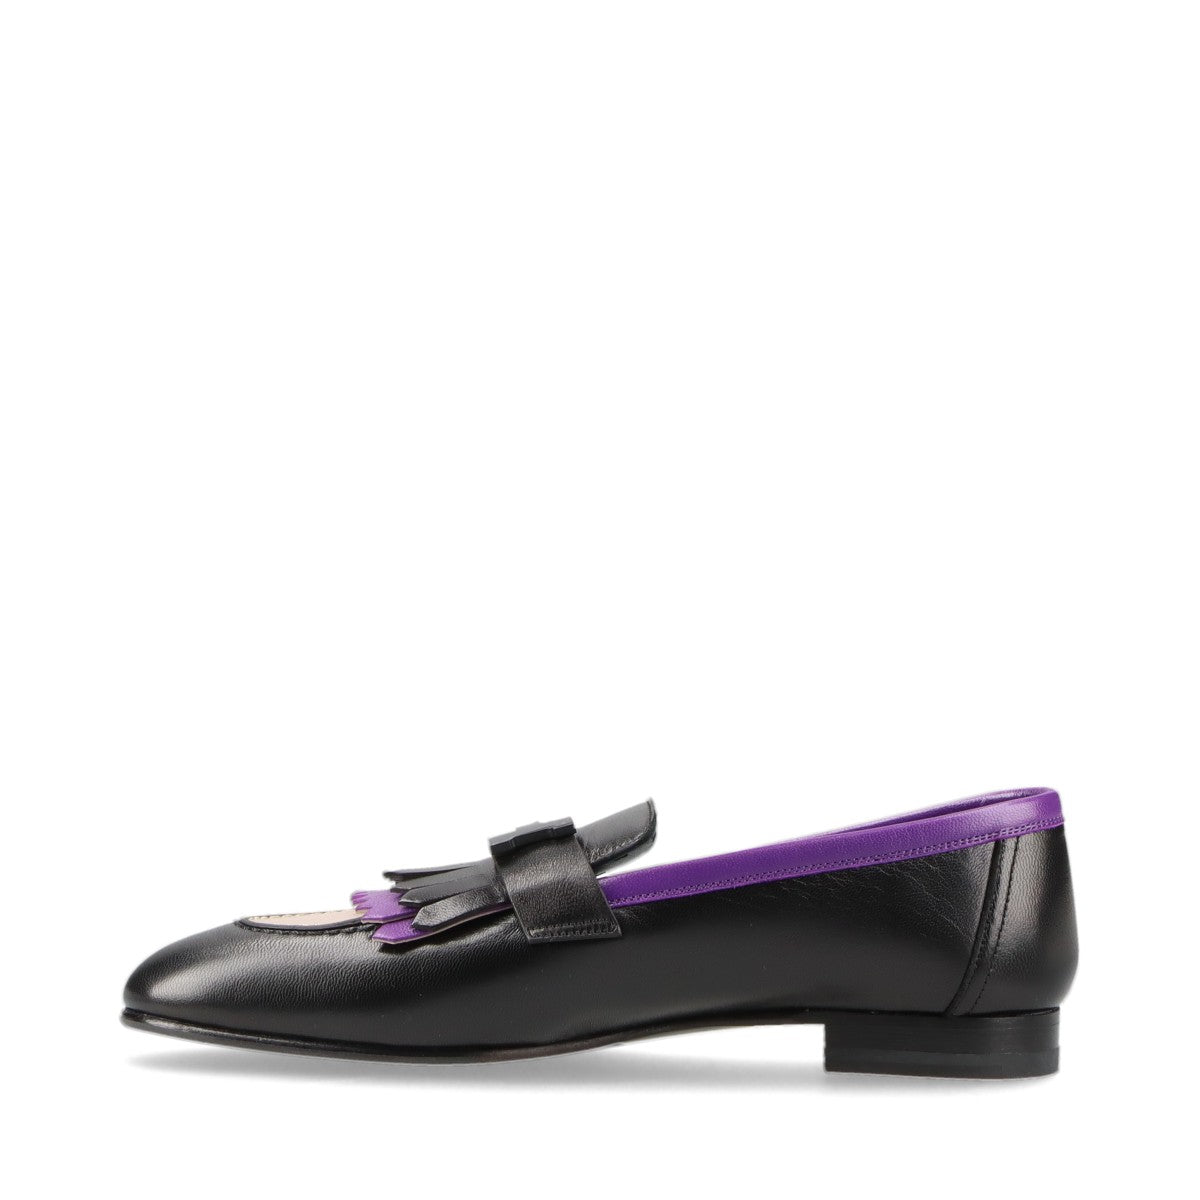 Hermès Royal Leather Loafer EU37 1/2 Ladies' Black x purple Constance Fringe box There is a bag